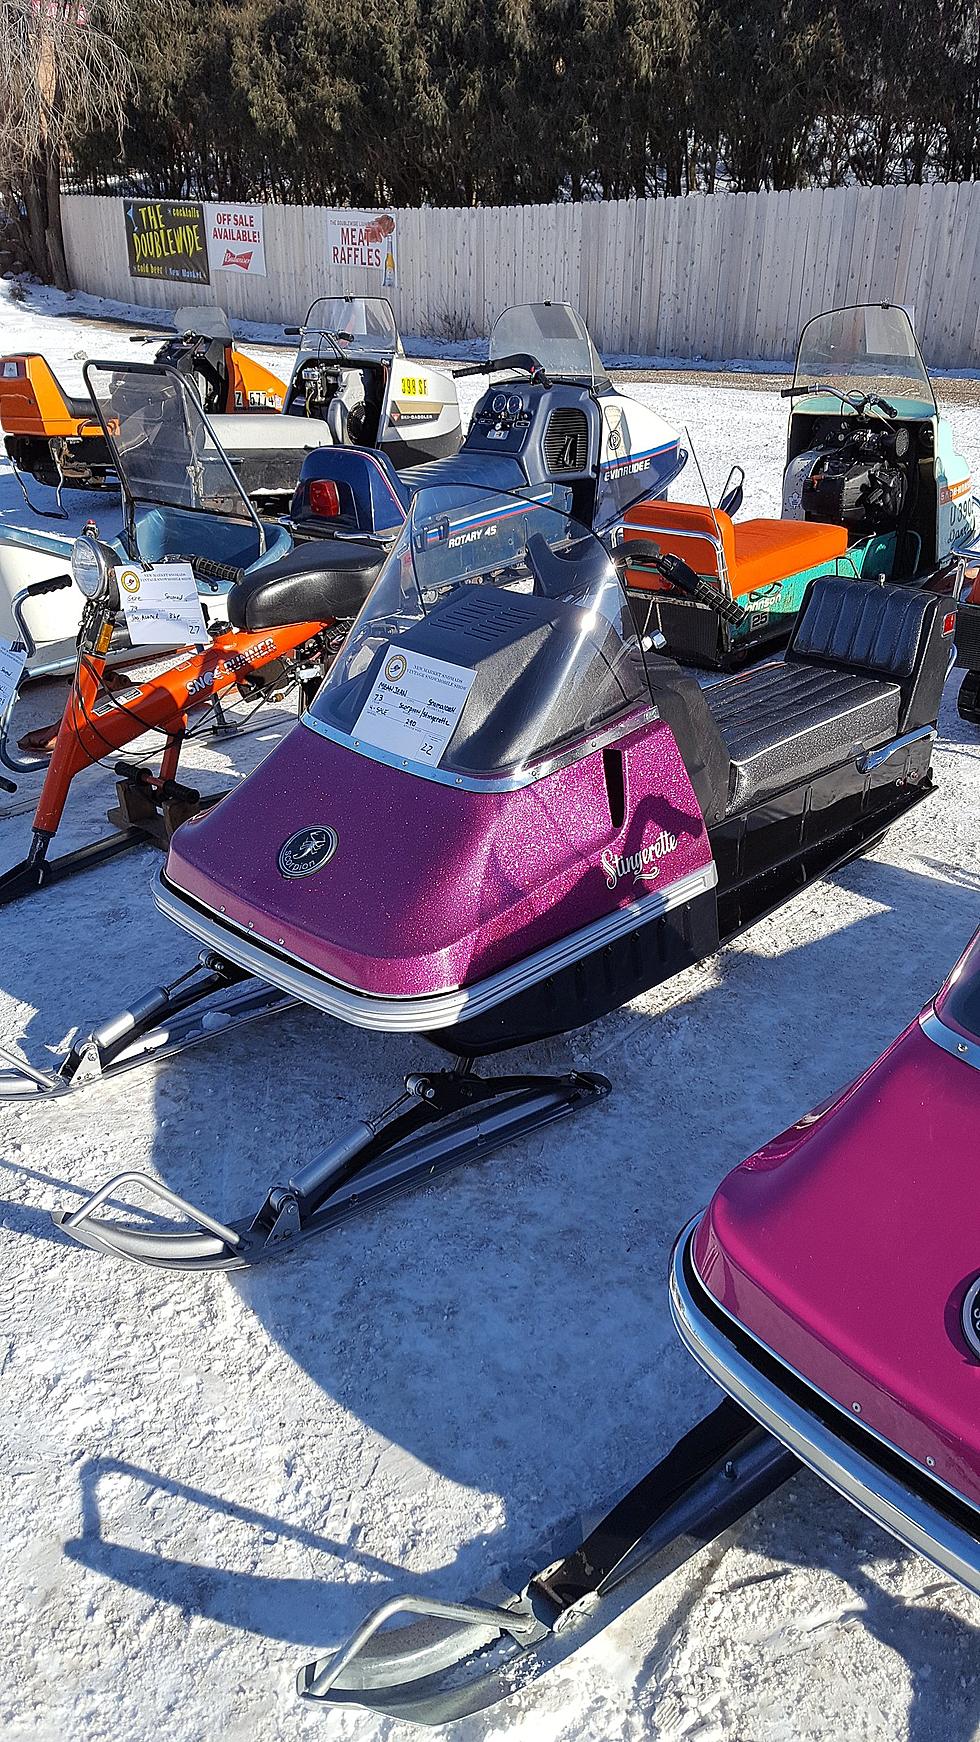 Travel Back In Time By Taking In Vintage Snowmobiles December 4th